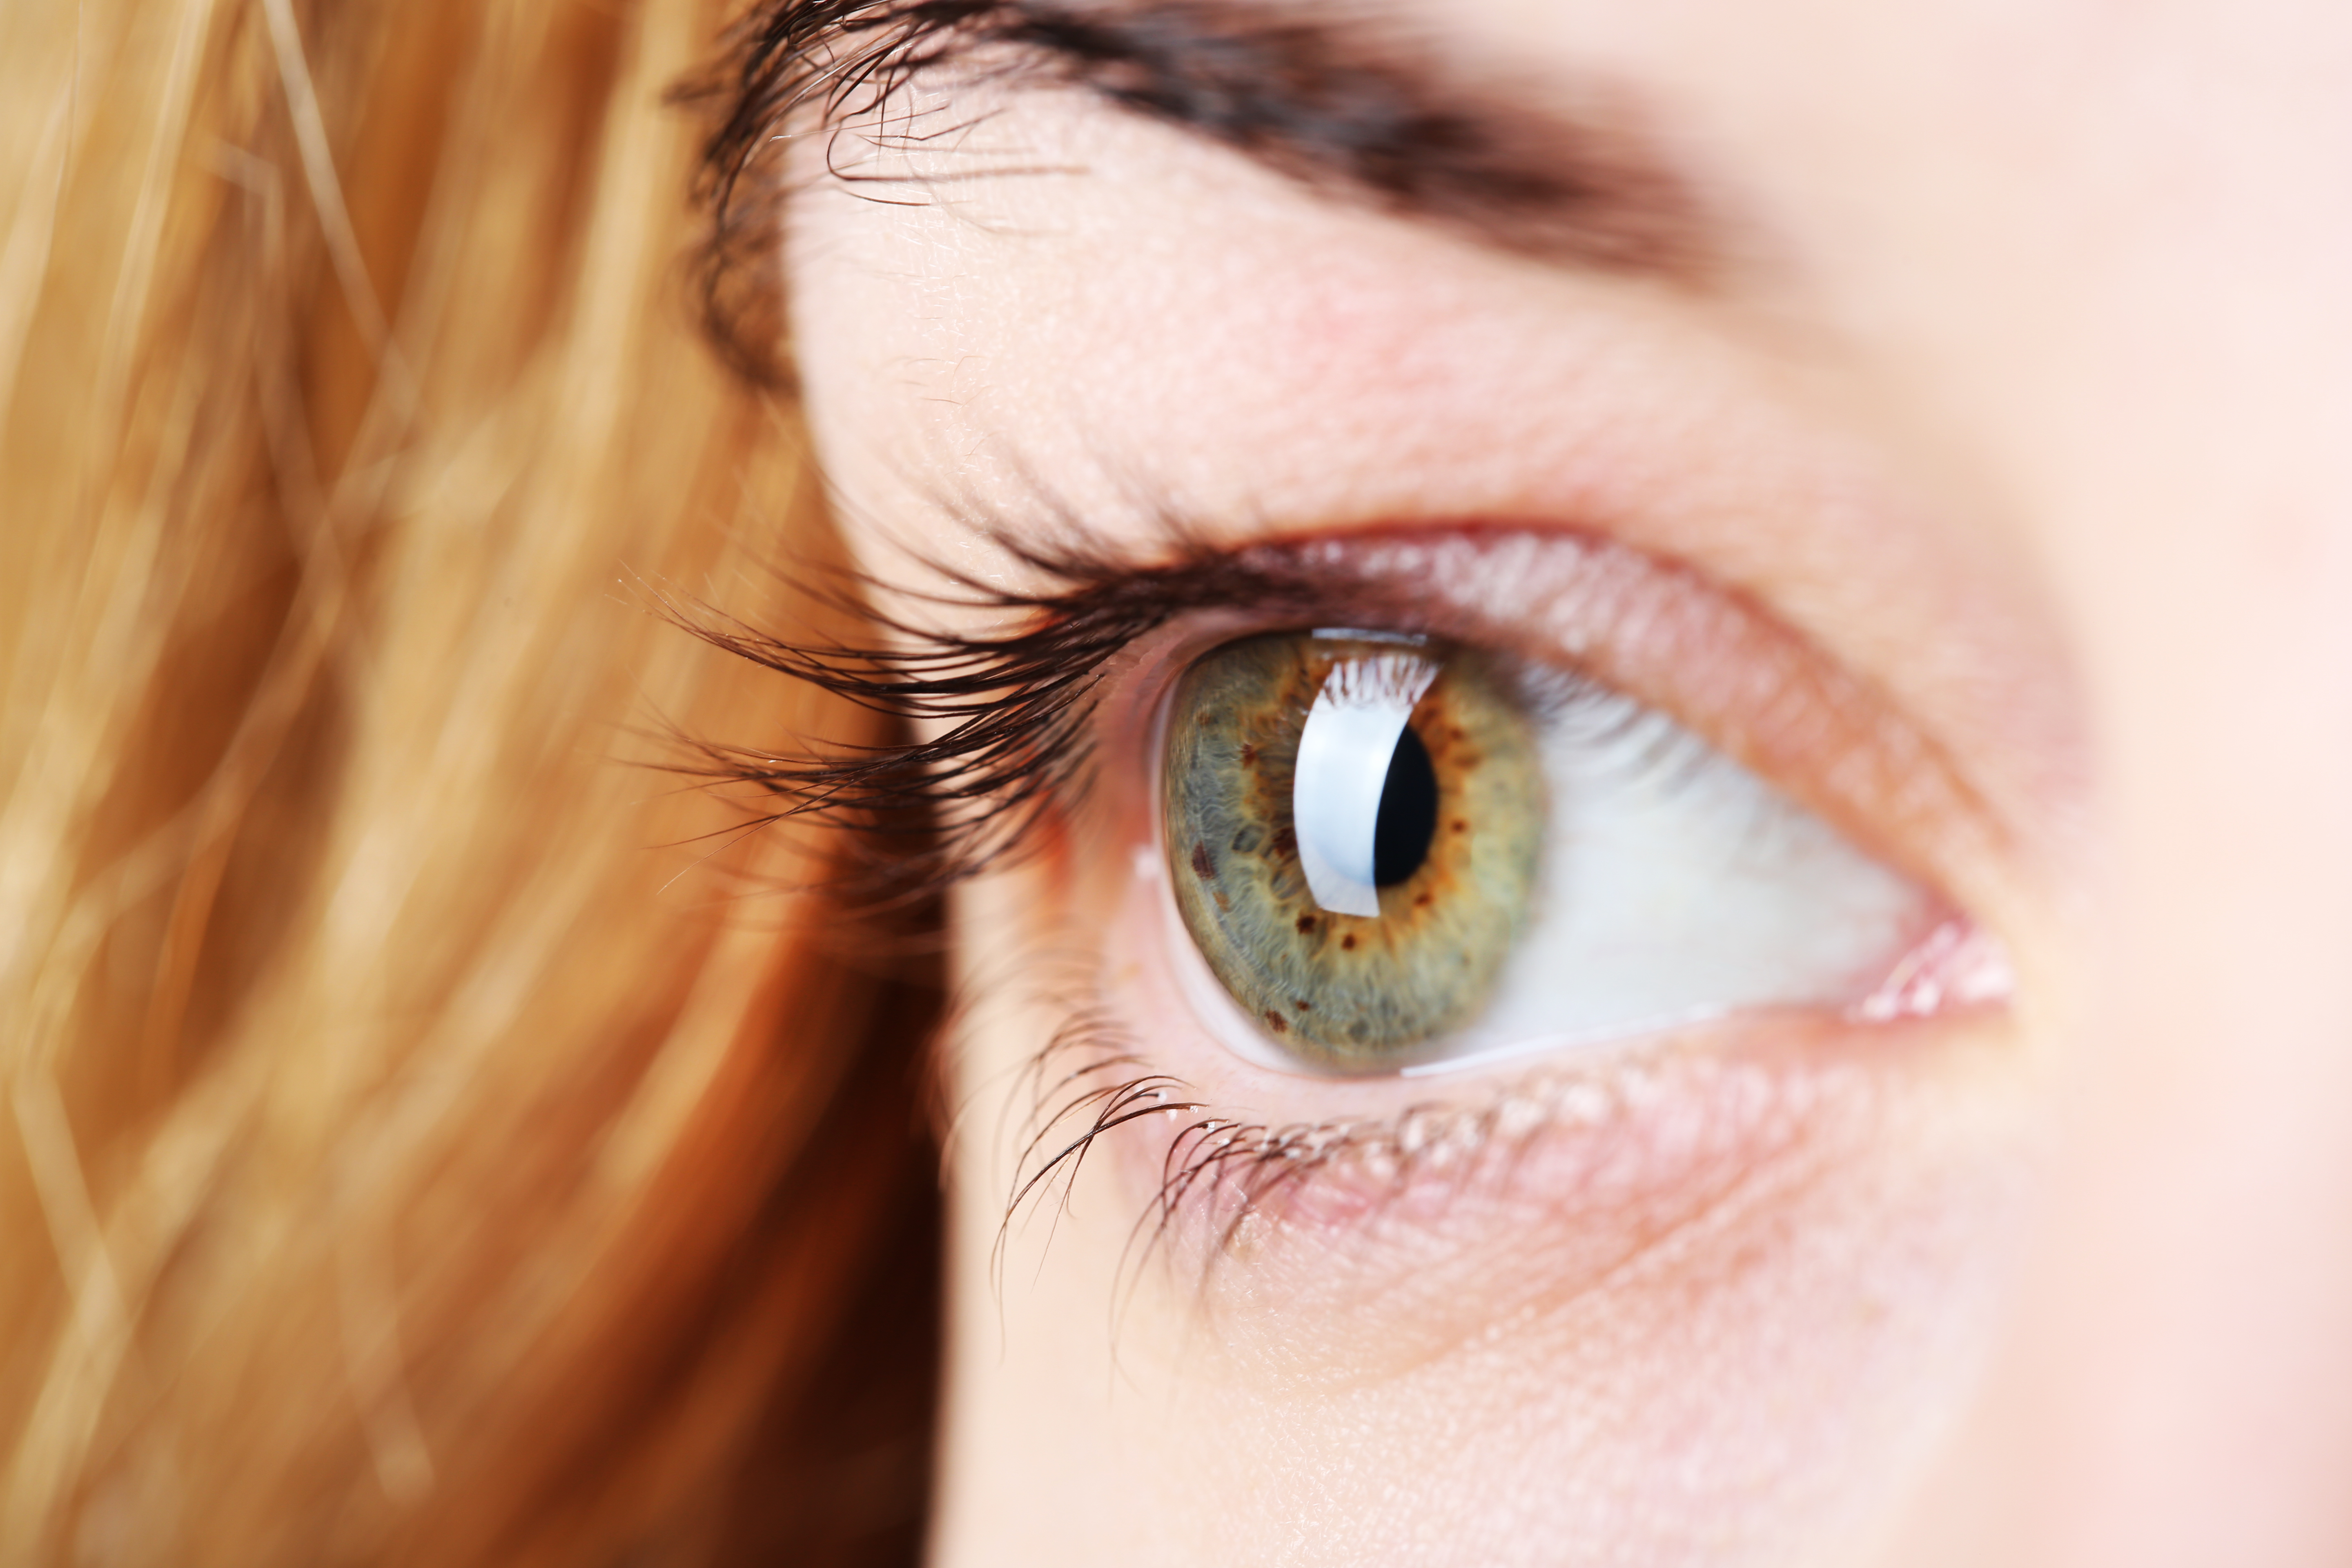 Thanks To Color Vision, The Human Eye Can Distinguish Between Most ...